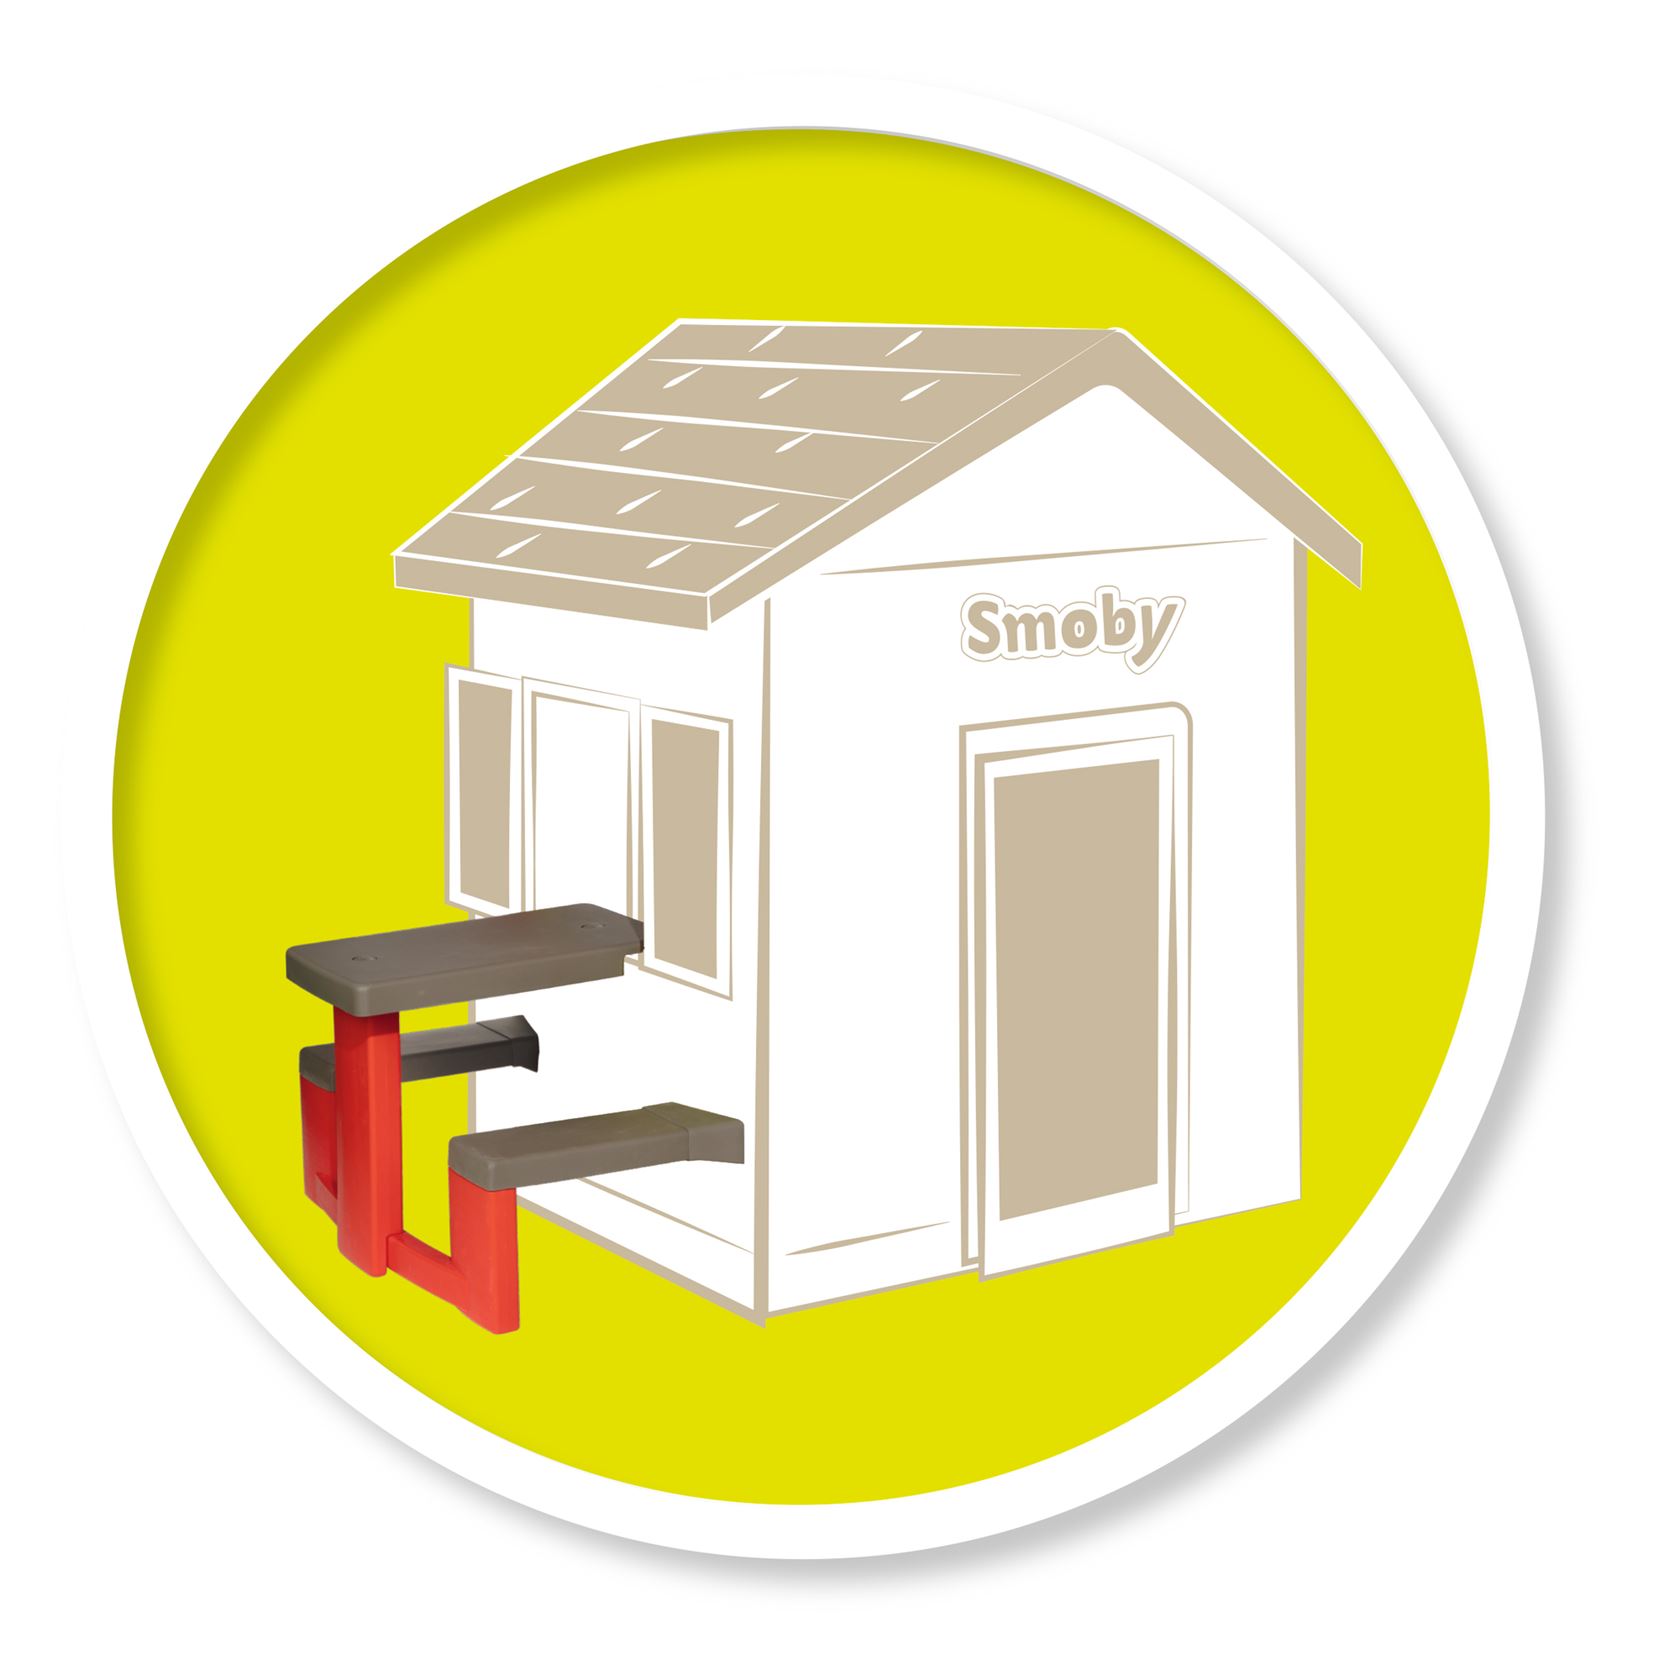 Smoby accessory - removable picnic table for Smoby playhouses